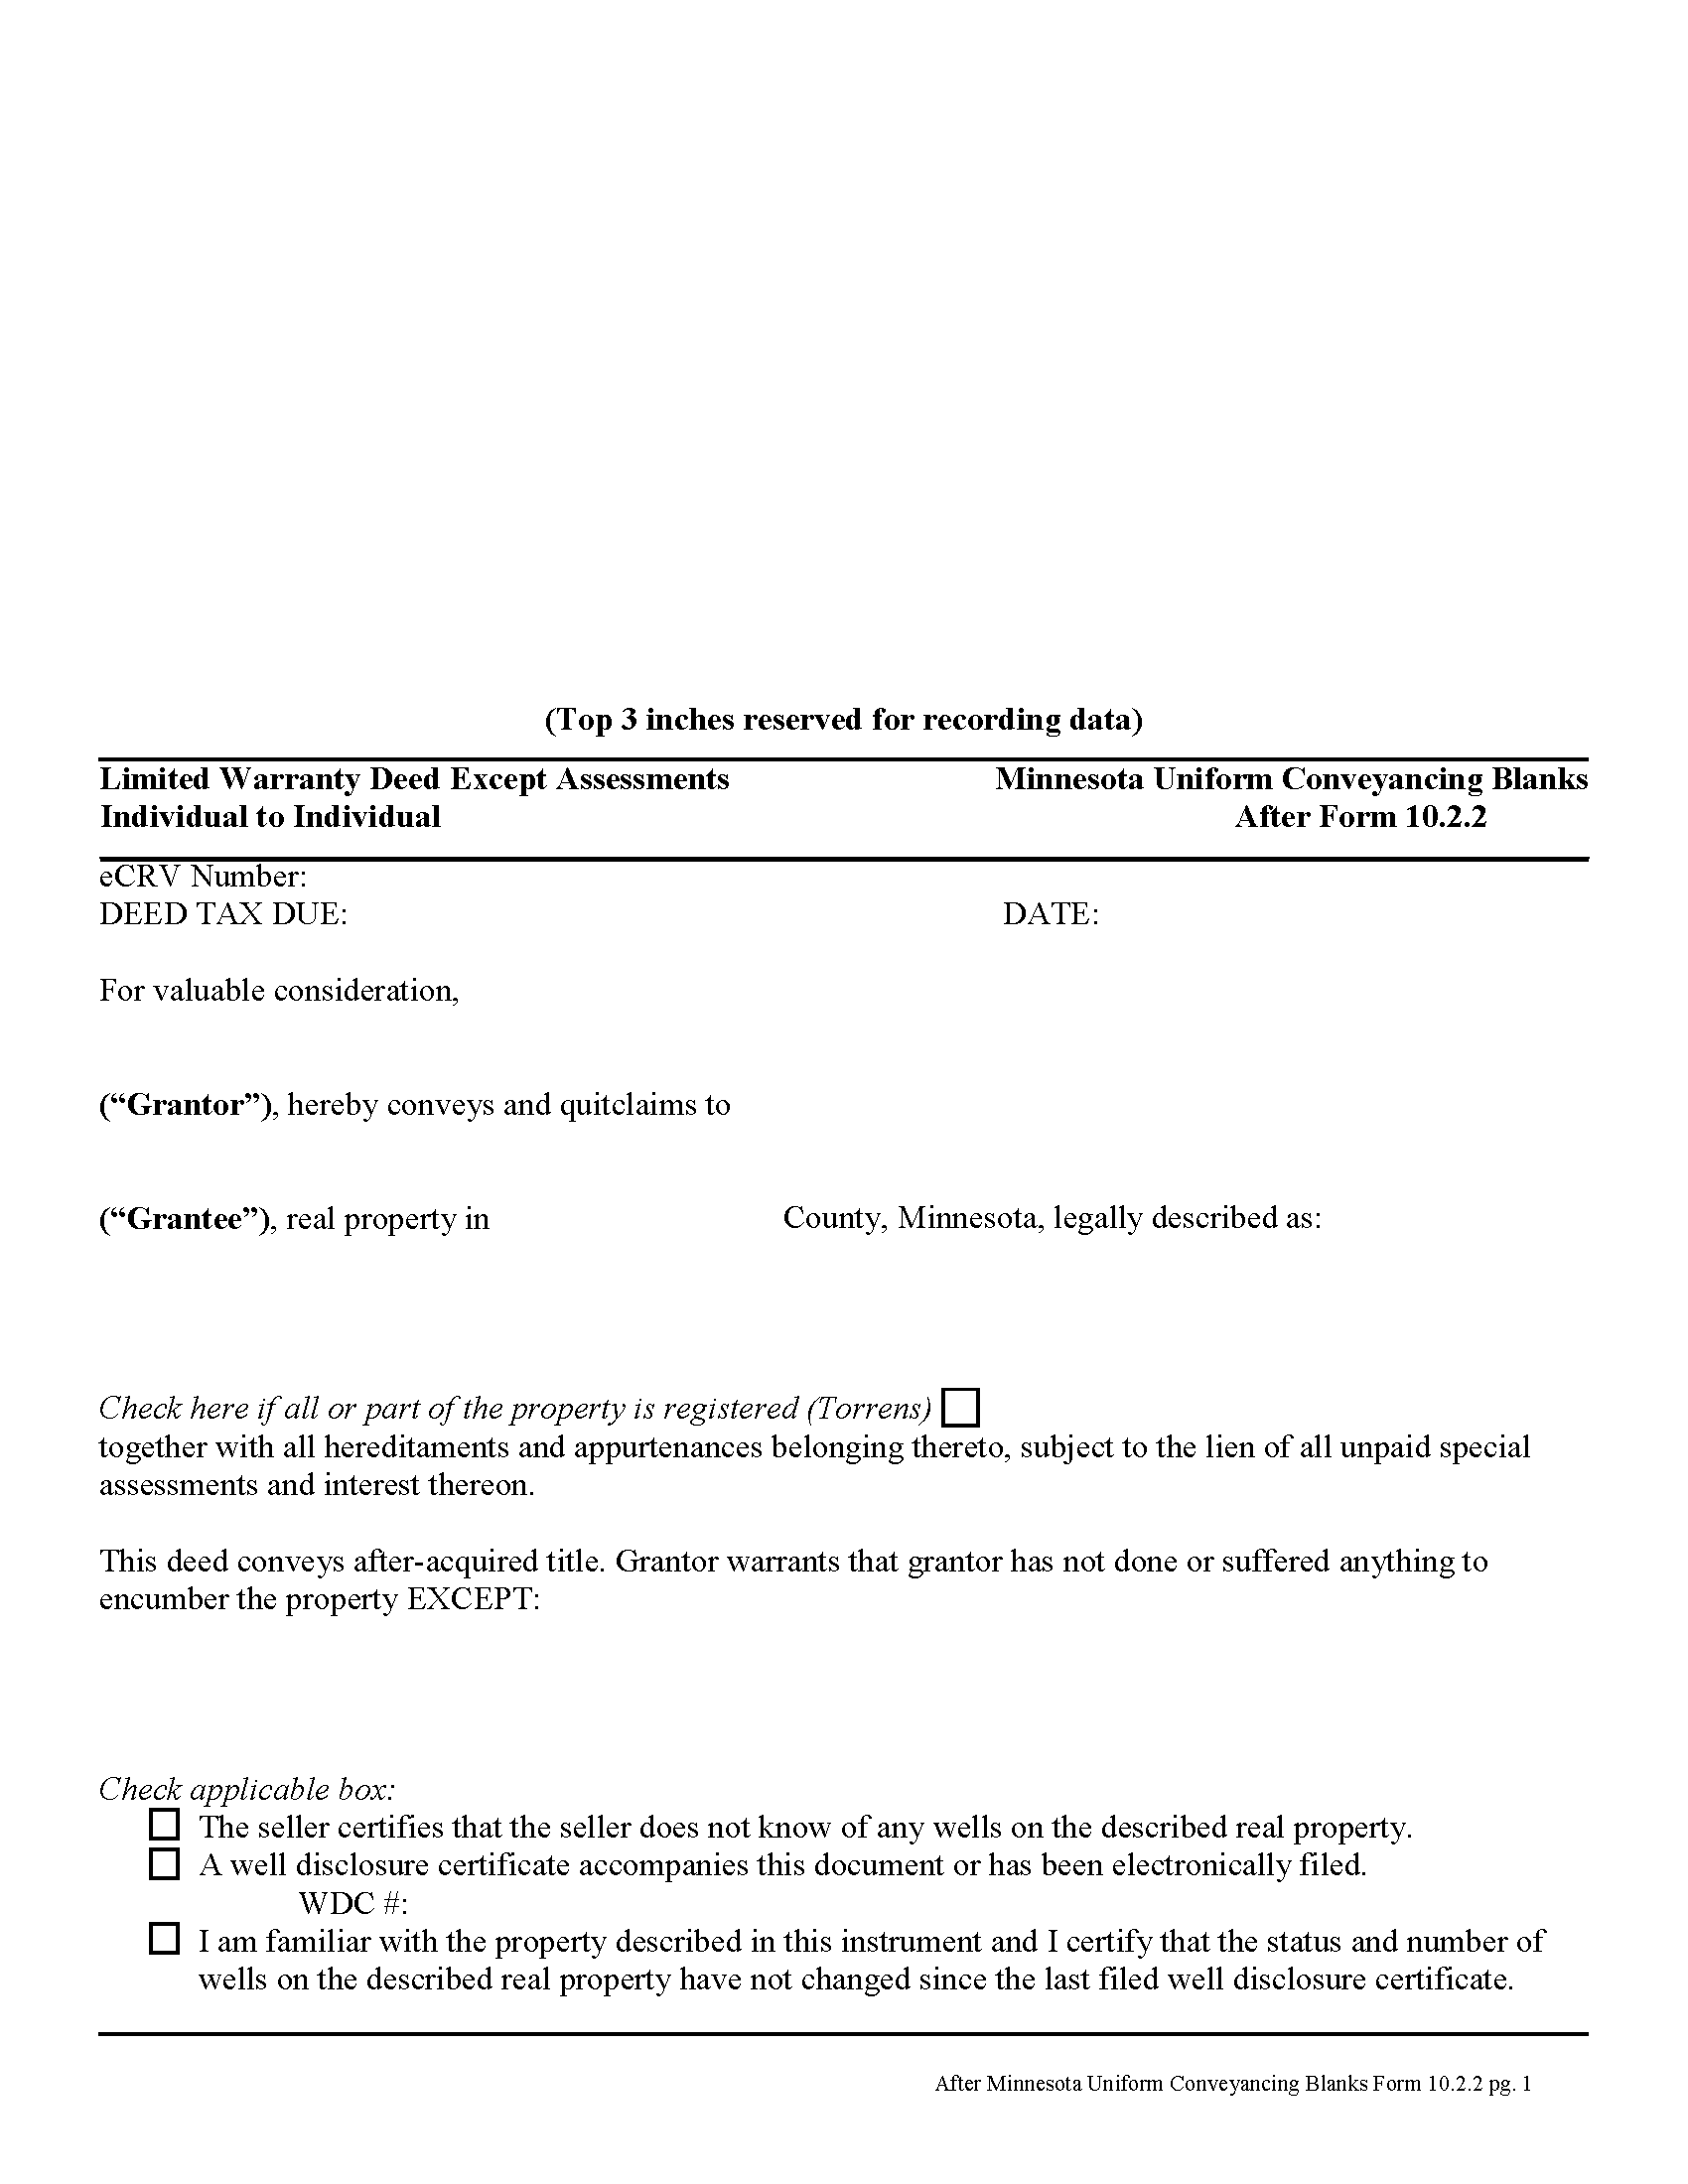 Limited Warranty Deed Excluding Assessment Form